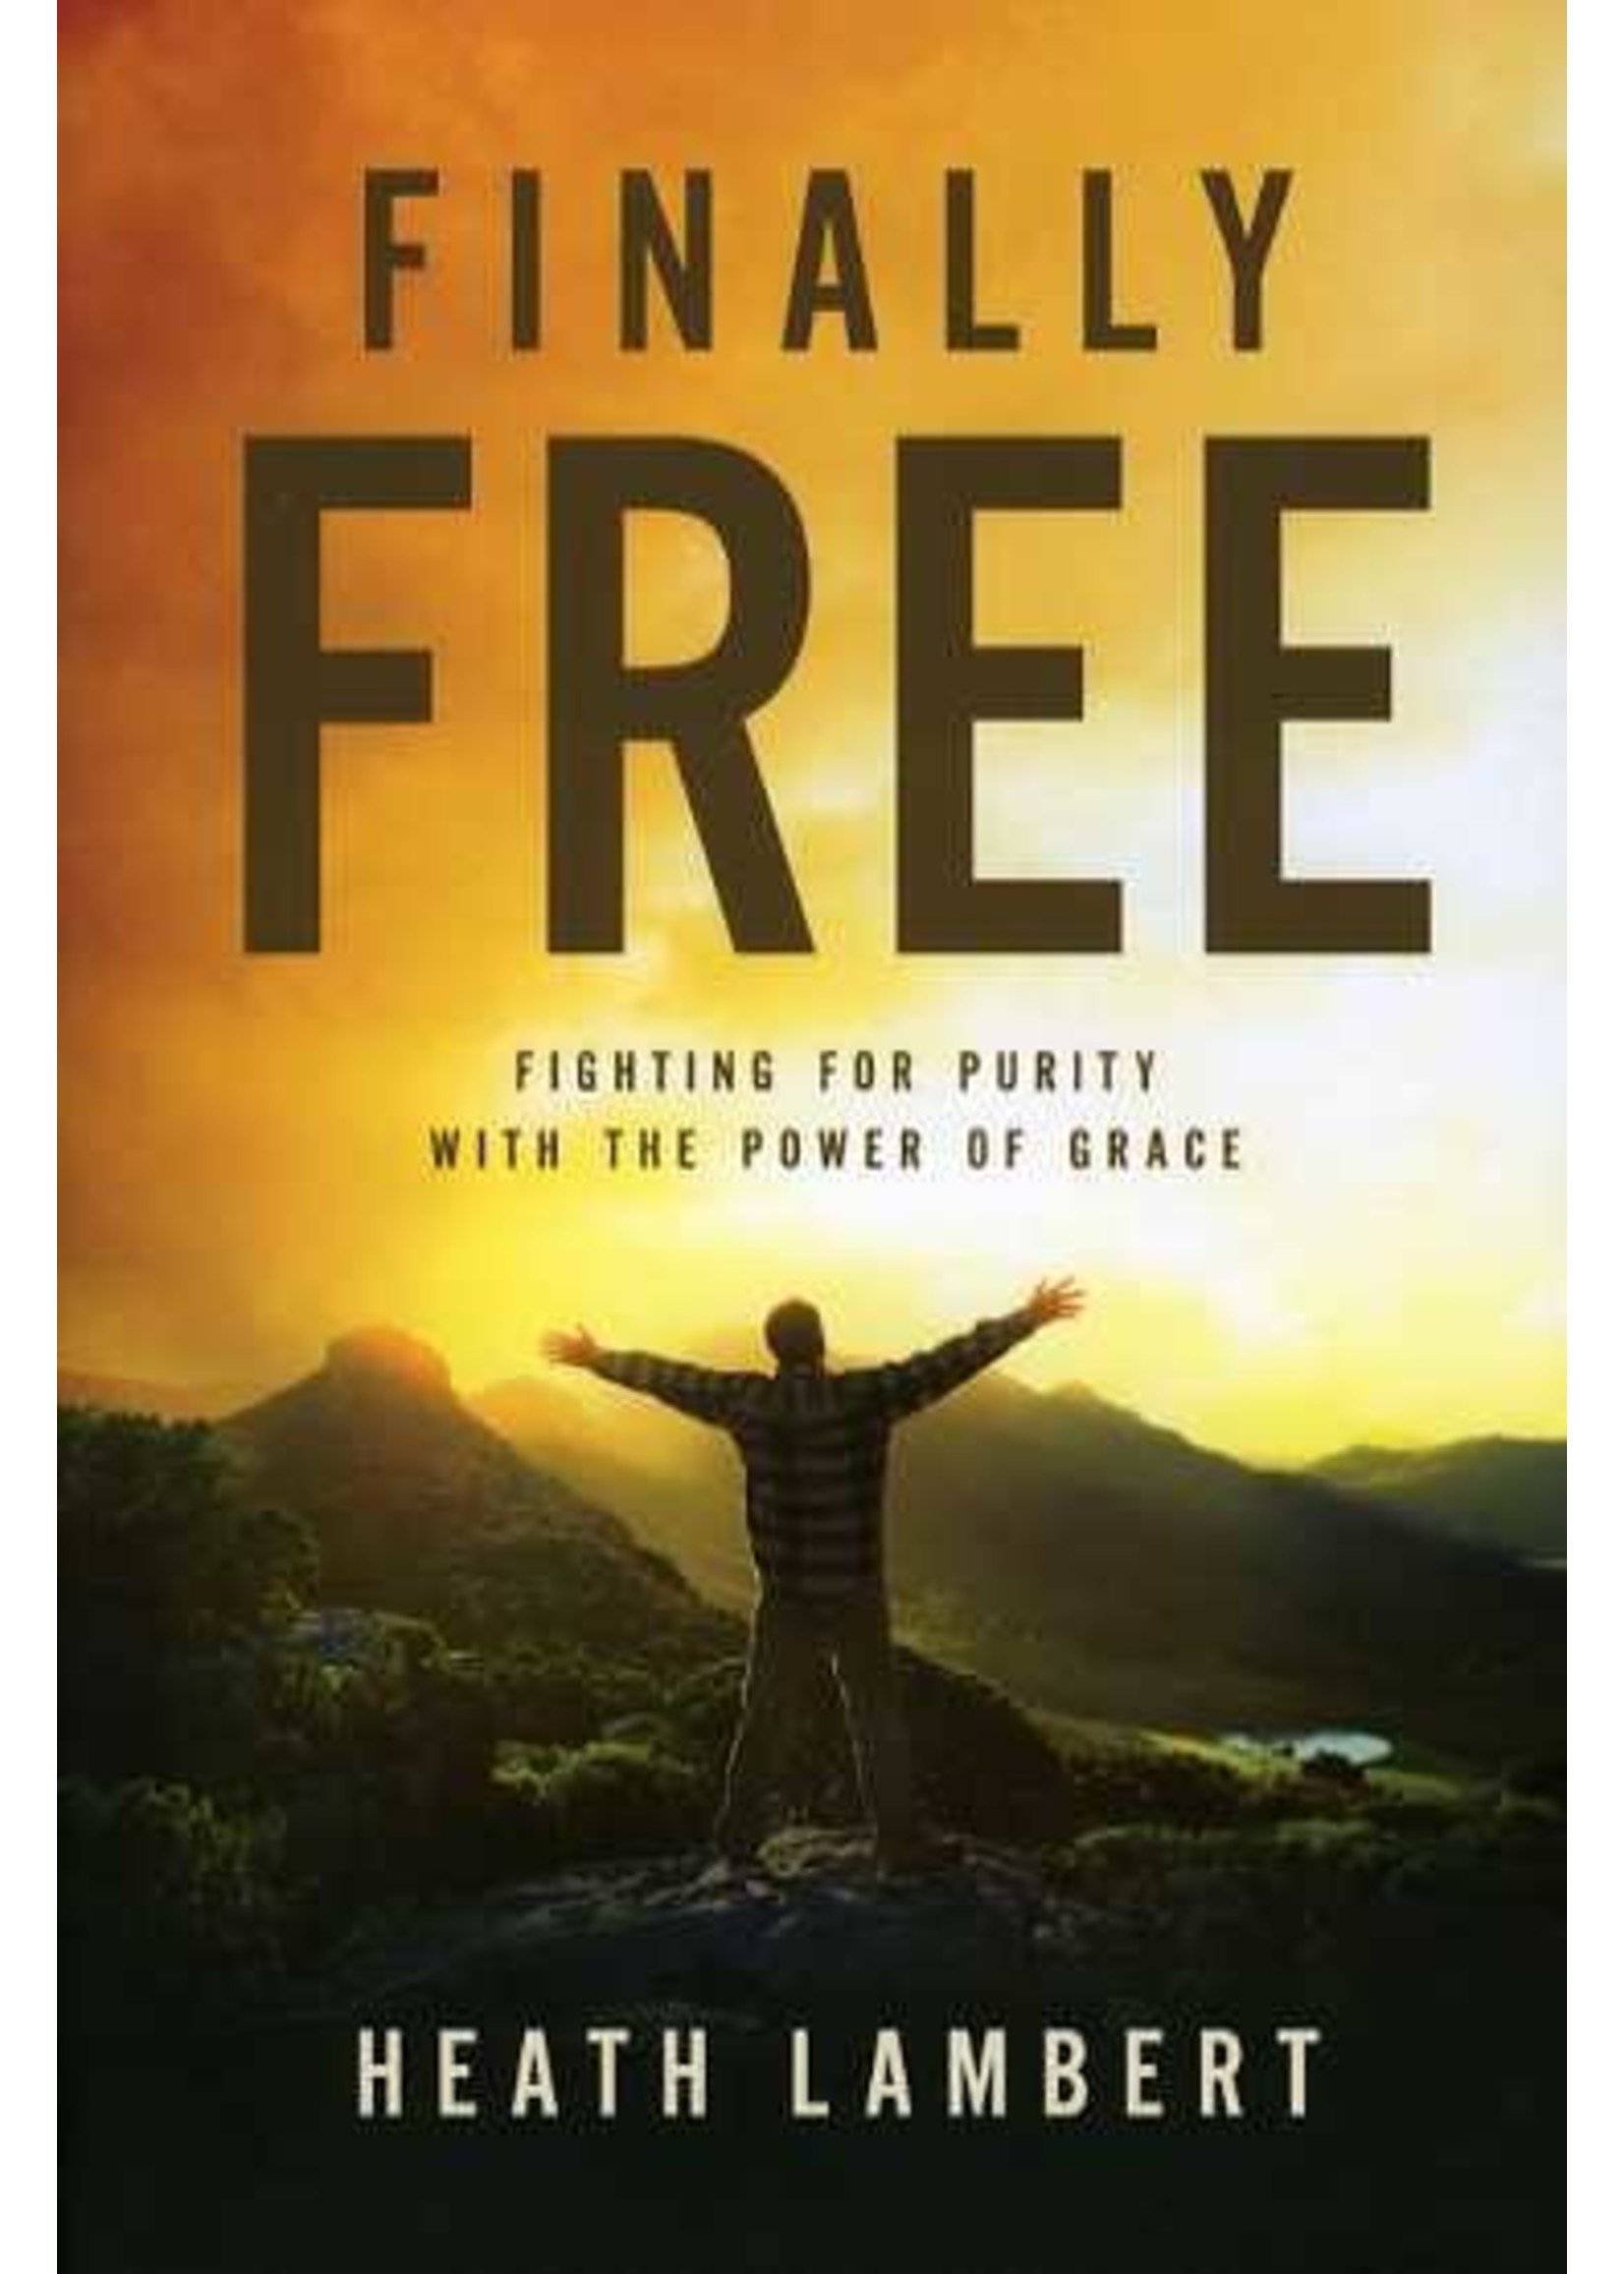 Zondervan Finally Free: Fighting for Purity with the Power of Grace - Heath Lambert